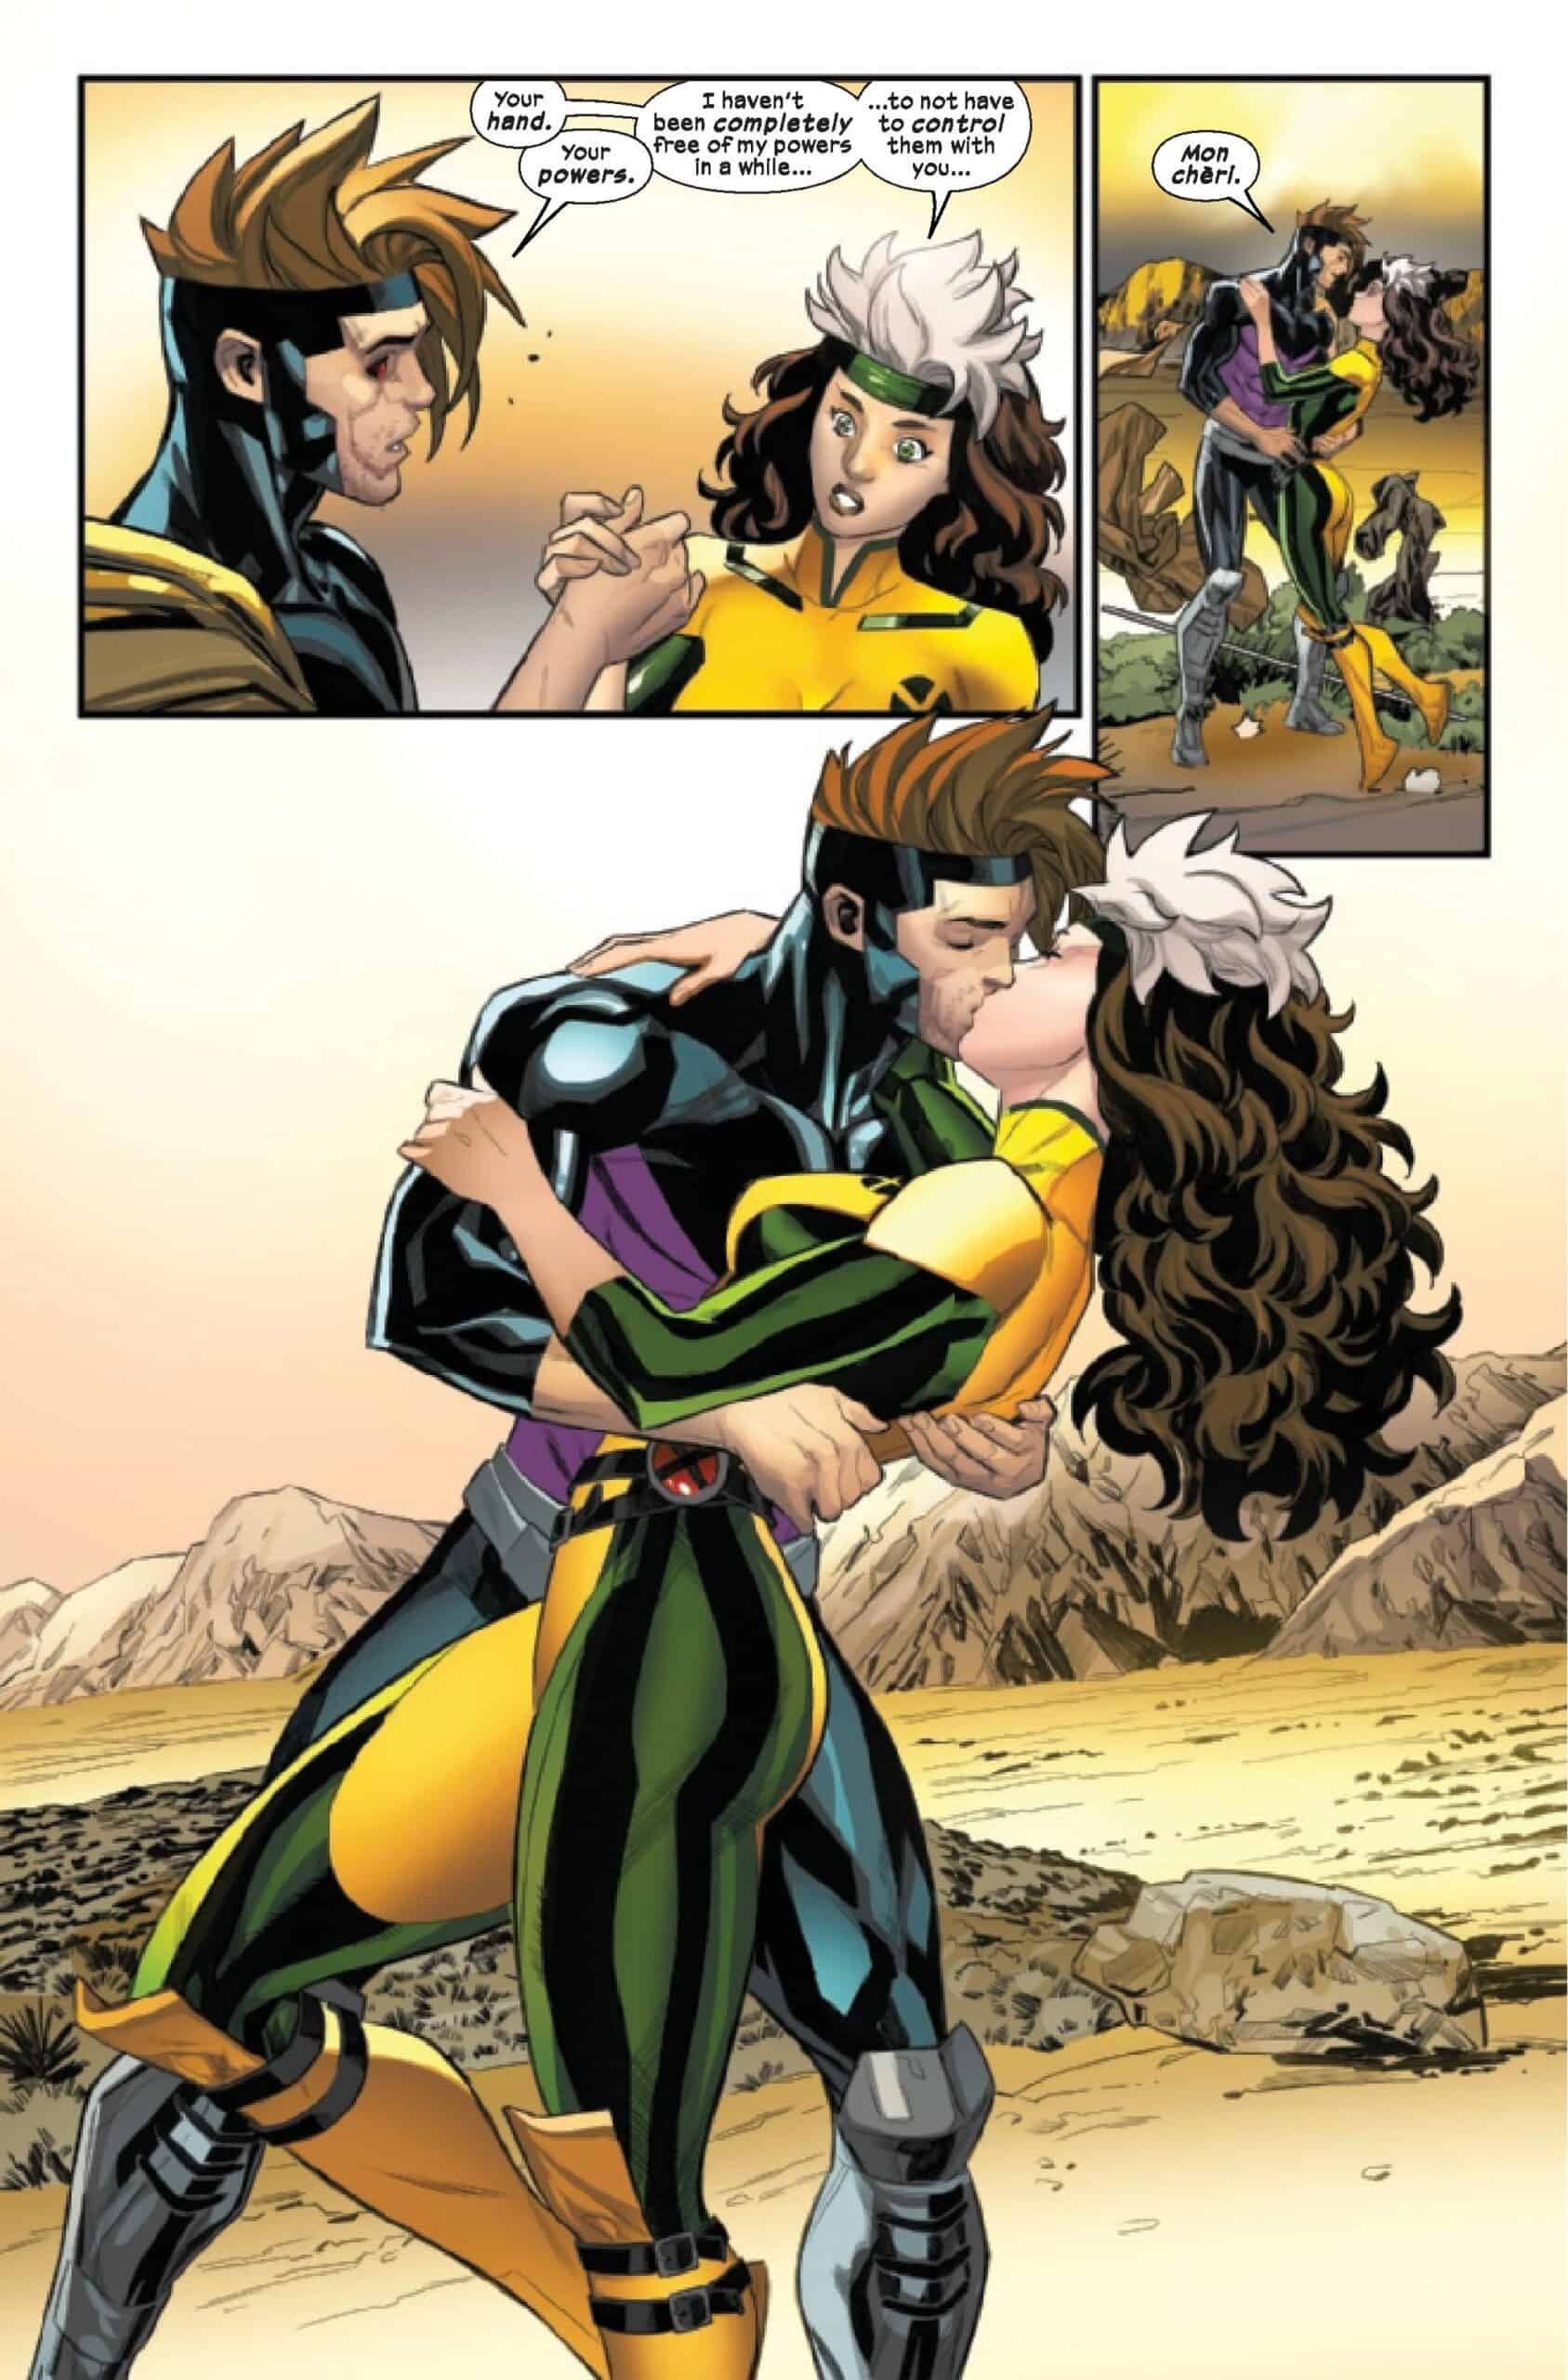 Gambit and Rogue reunite in their own 2023 title